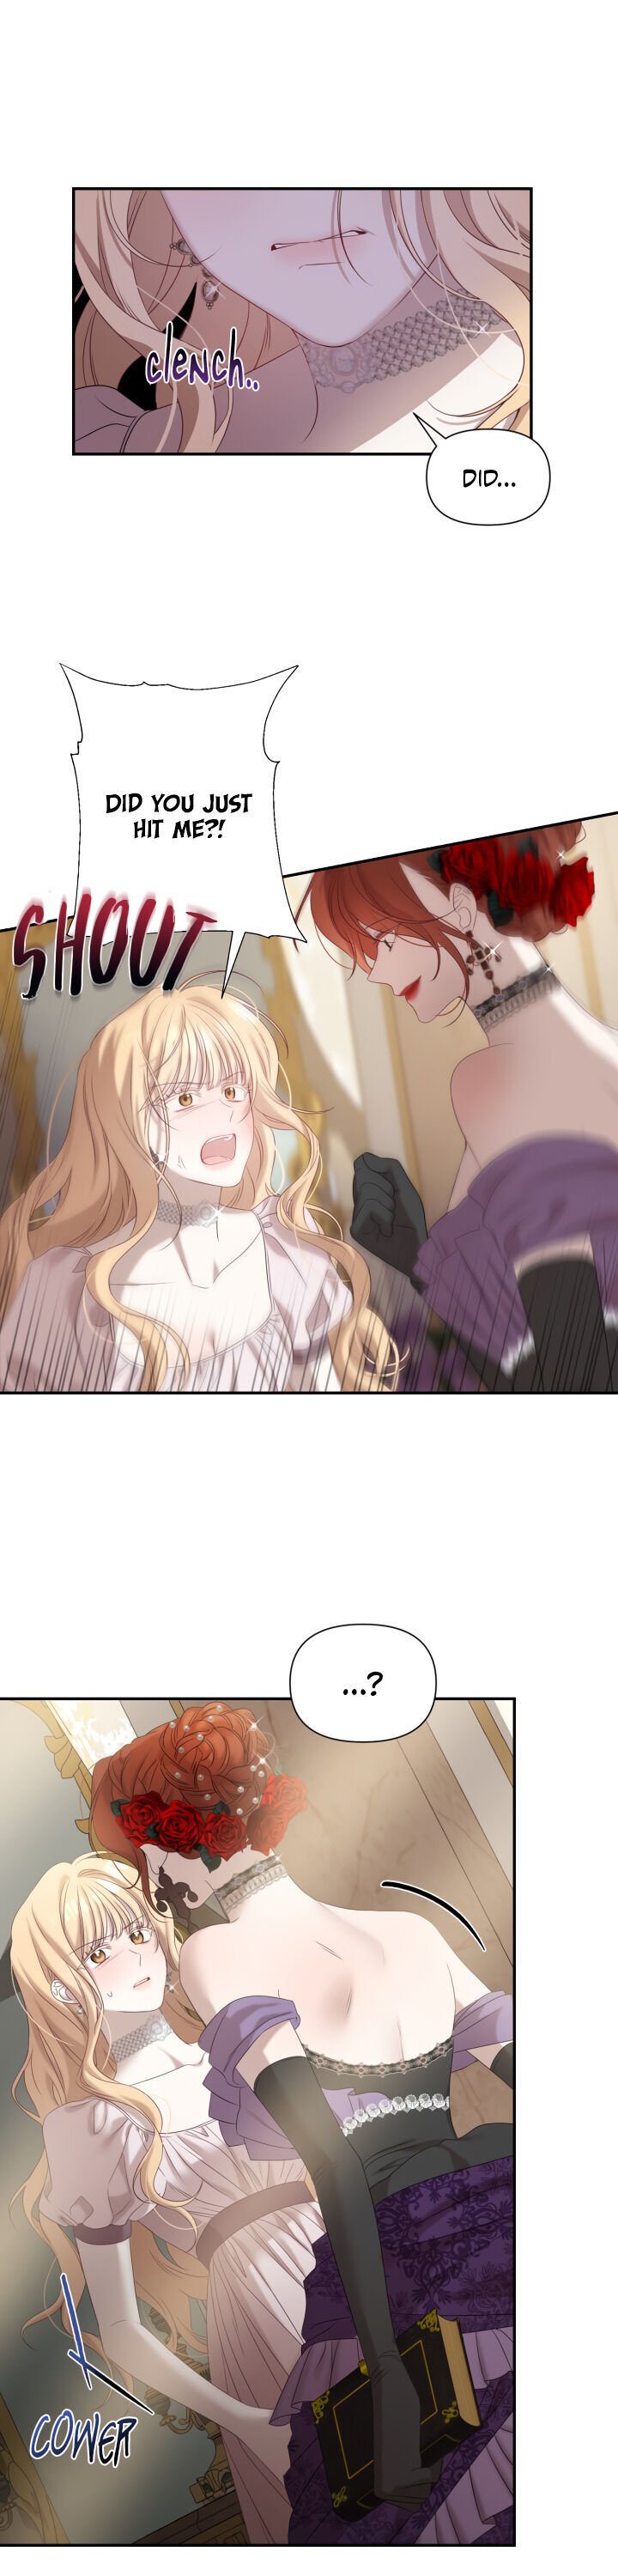 The Stepmother Likes Harems chapter 0